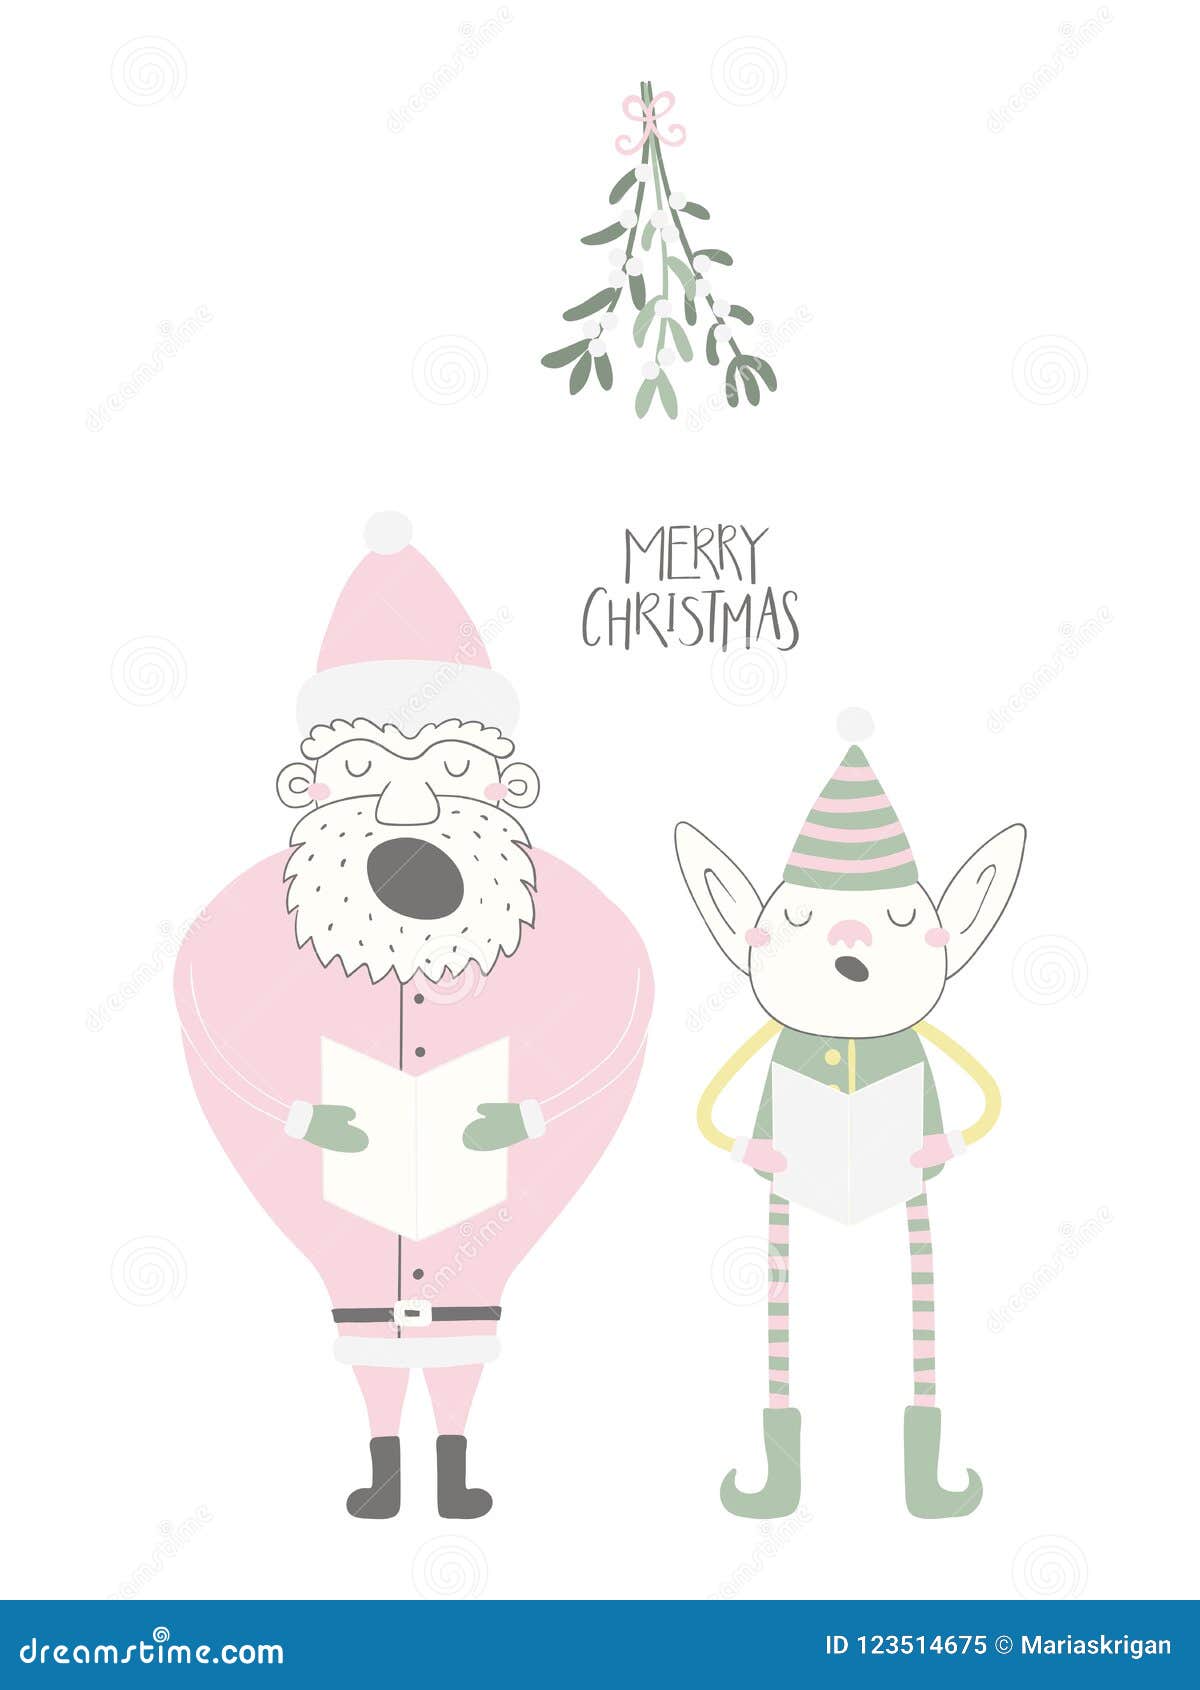 Funny Singing Santa and Elf Christmas Card Stock Vector - Illustration of  character, ears: 123514675